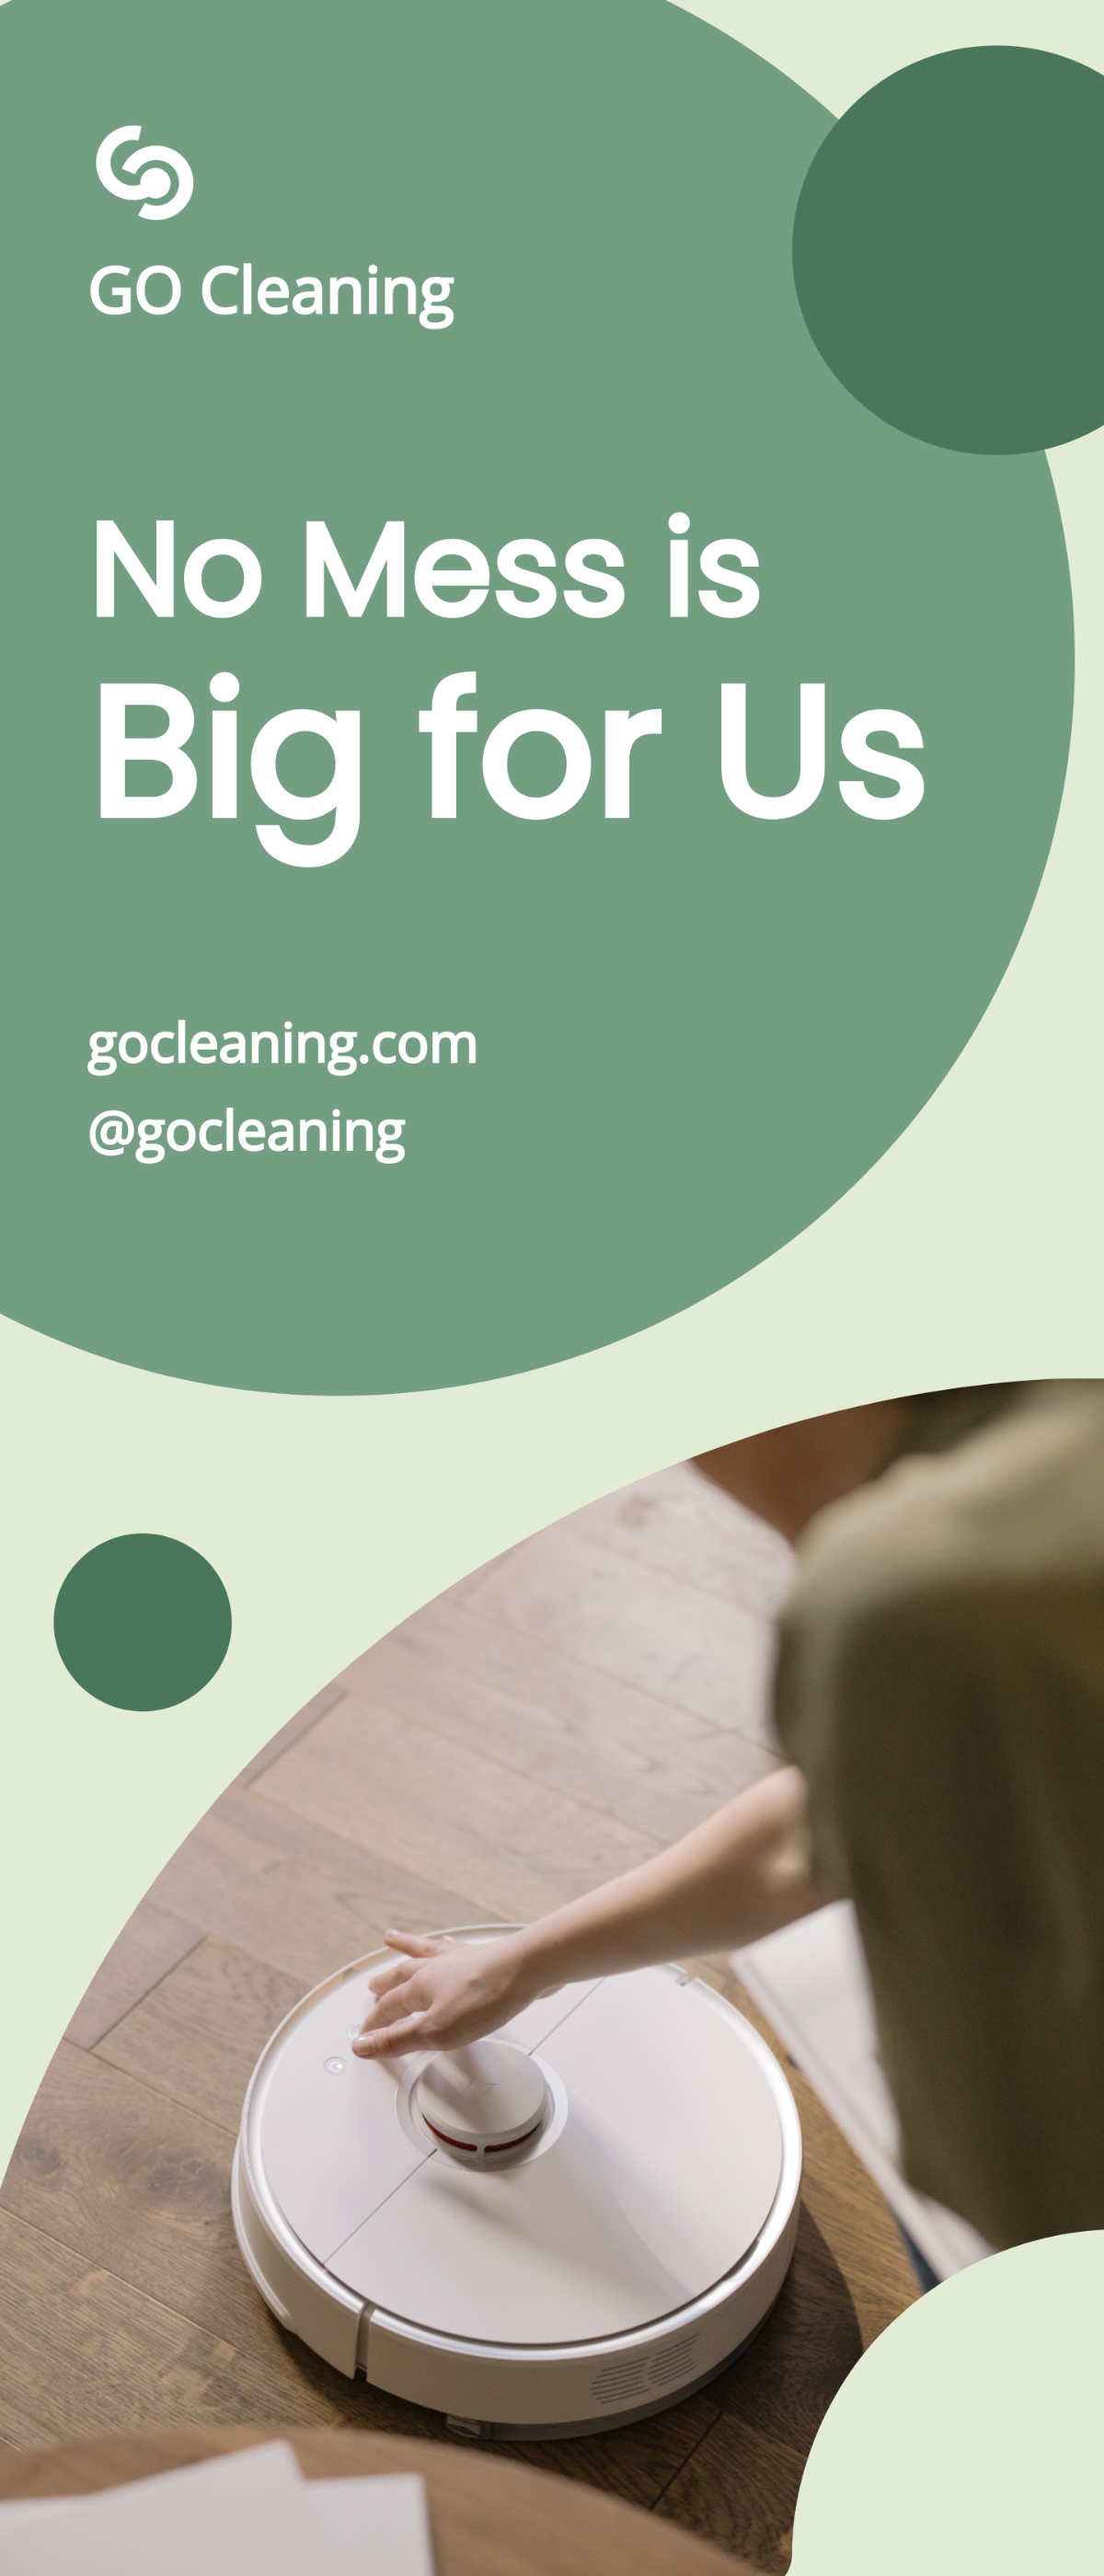 Modern Cleaning Services Roll-Up Banner Template